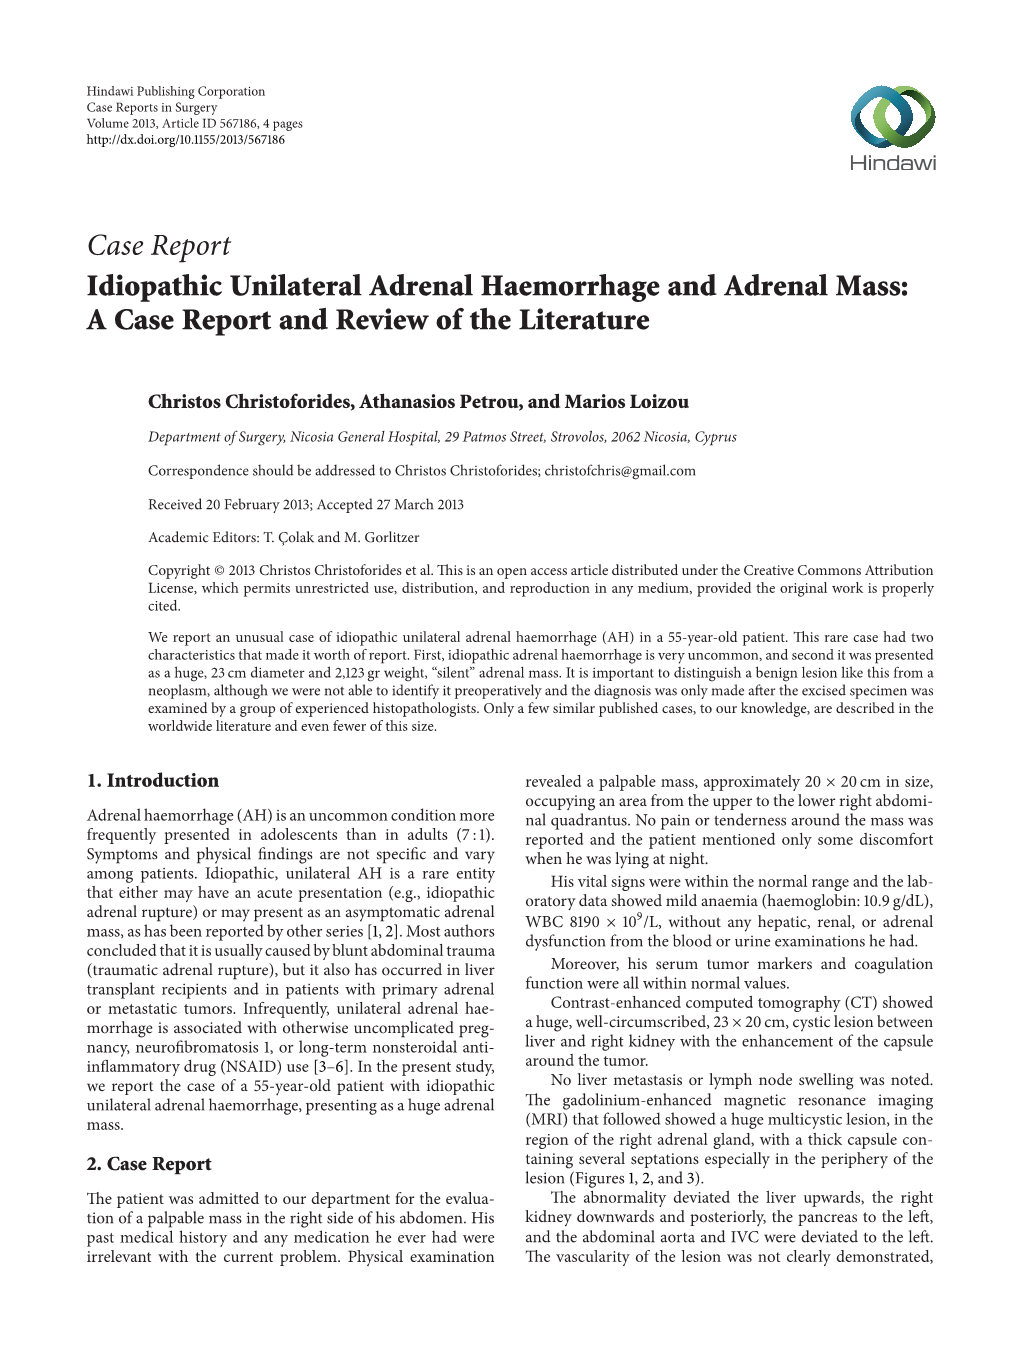 Case Report Idiopathic Unilateral Adrenal Haemorrhage and Adrenal Mass: a Case Report and Review of the Literature